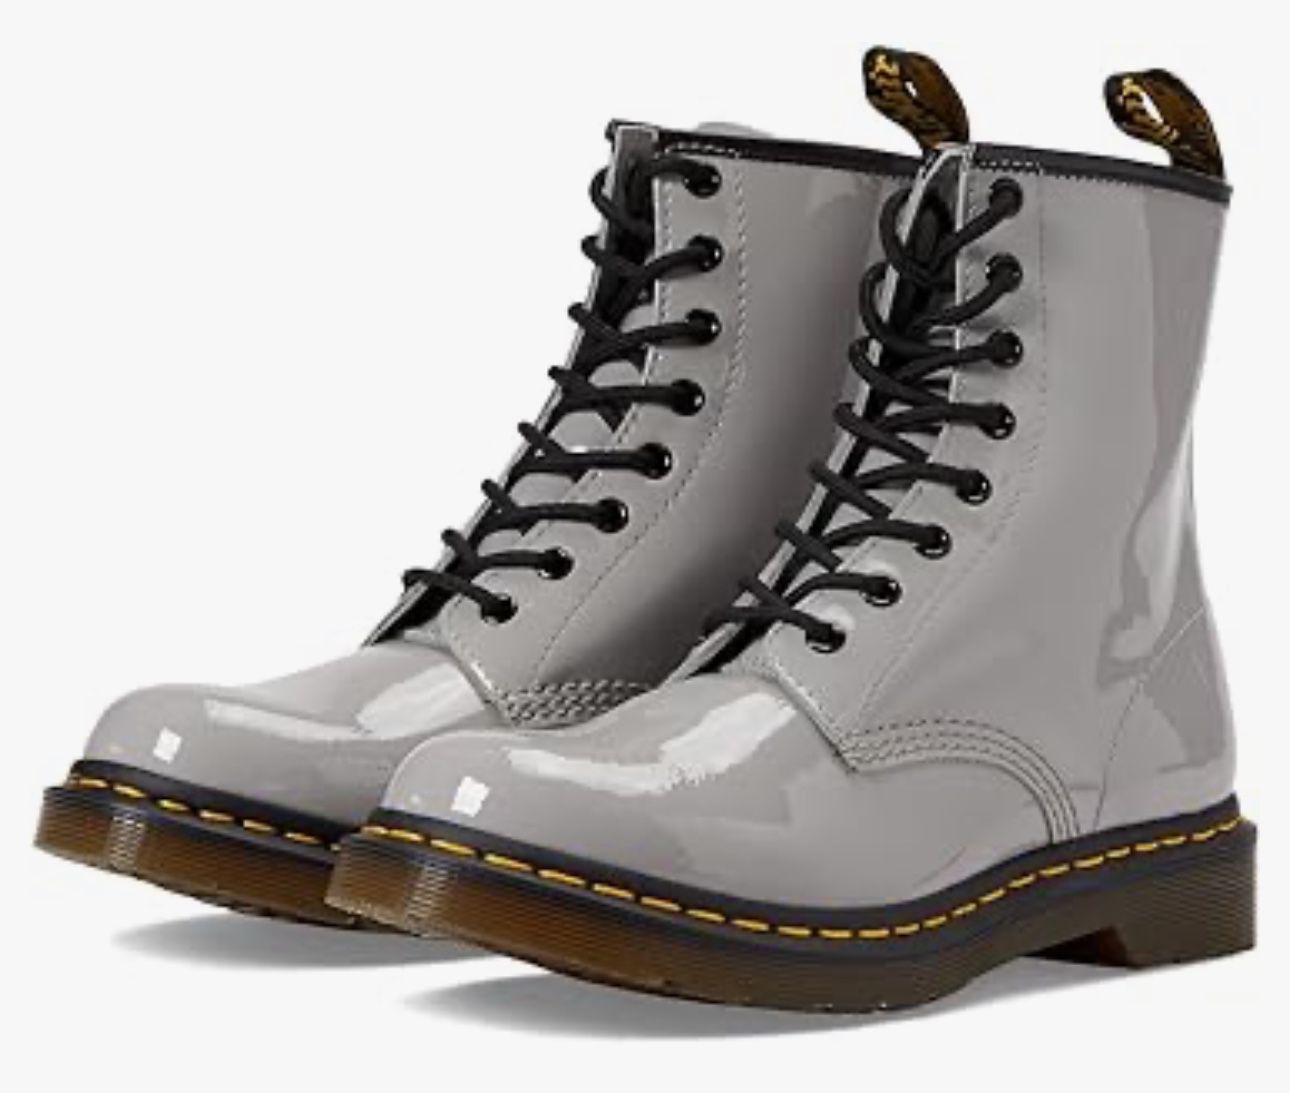 New Dr. Martens Gray Patent (Lamper) Leather 8 Hole Lace Up Boots (Style 1460), Size 7 